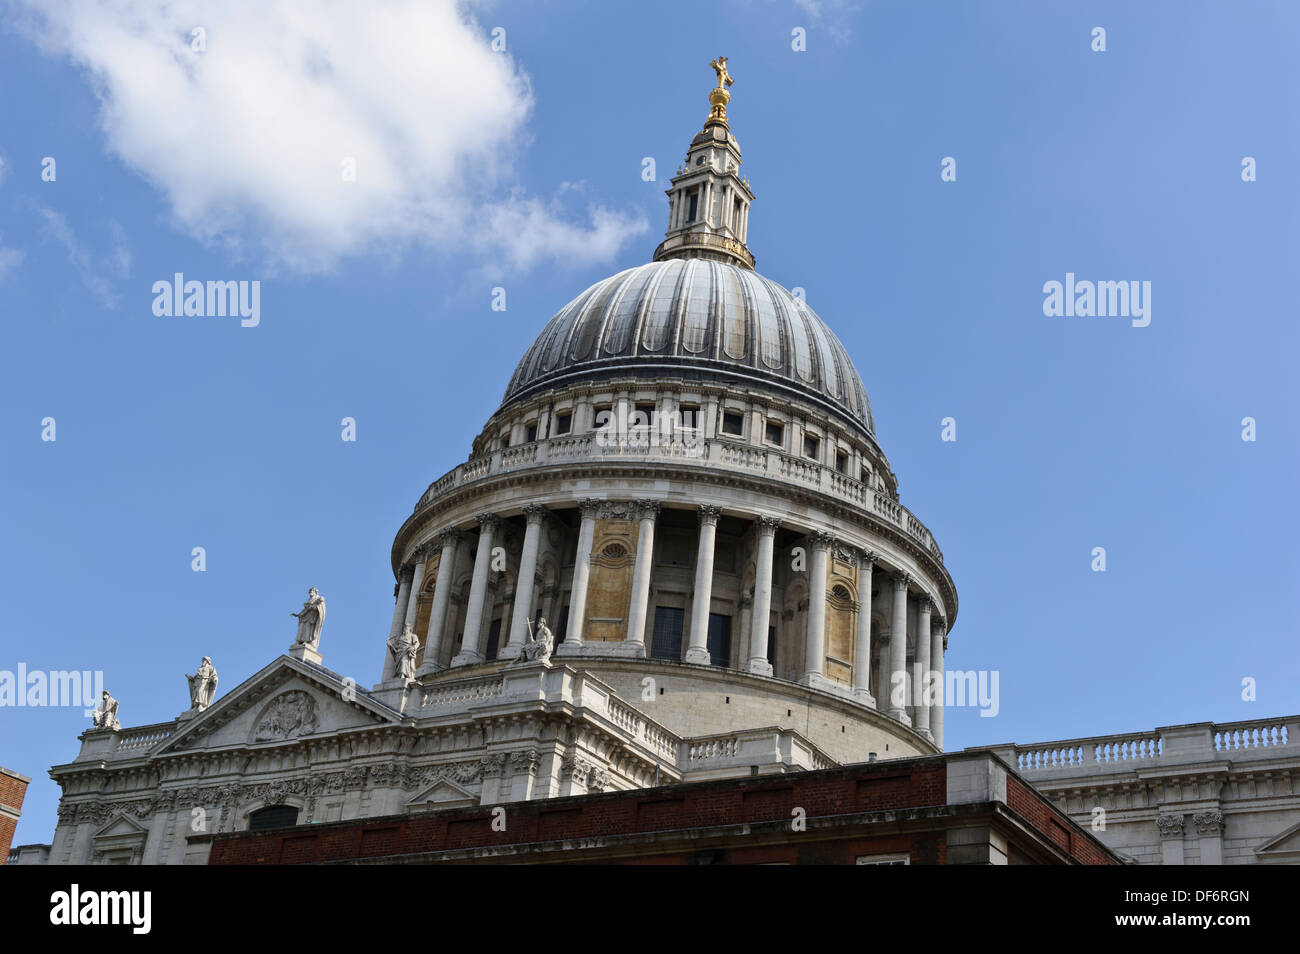 Iconic dome of St Paul's Cathedral, London, England, United Kingdom. Stock Photo